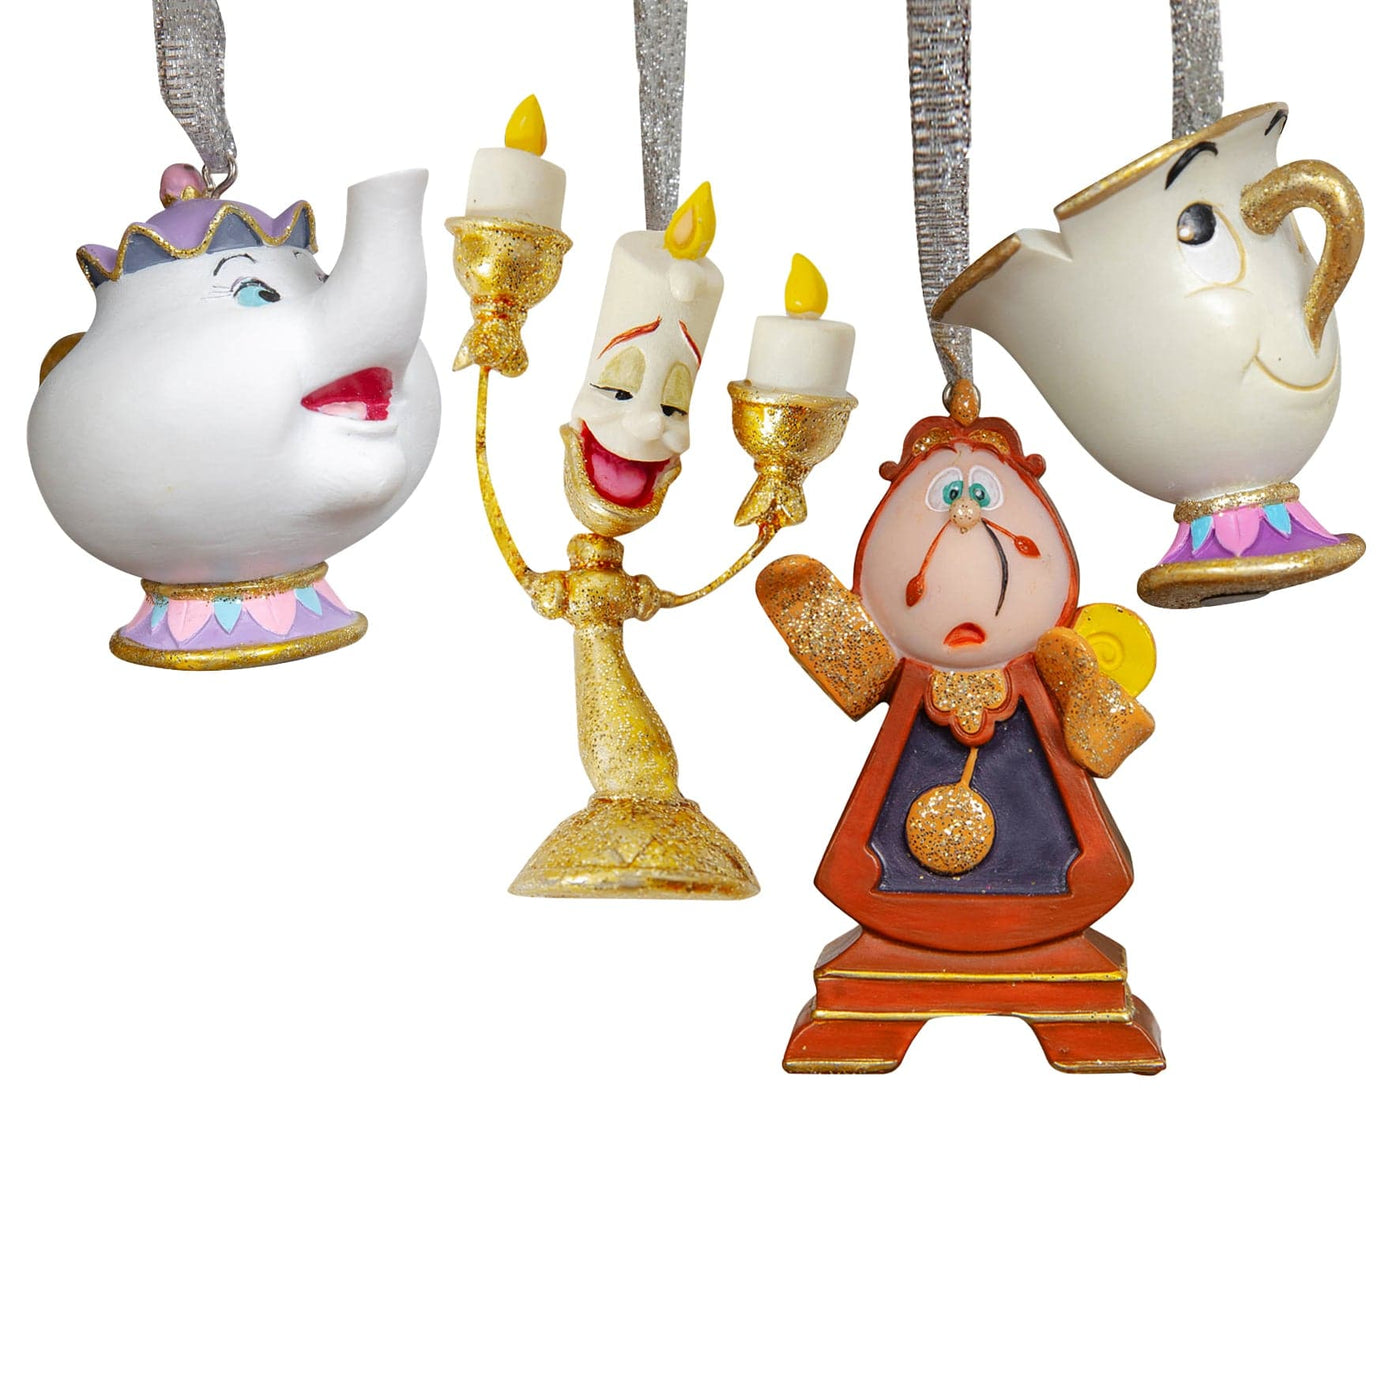 Widdop Gifts Christmas Decorations Disney Set of 4 Beauty and The Beast Christmas Tree Decorations